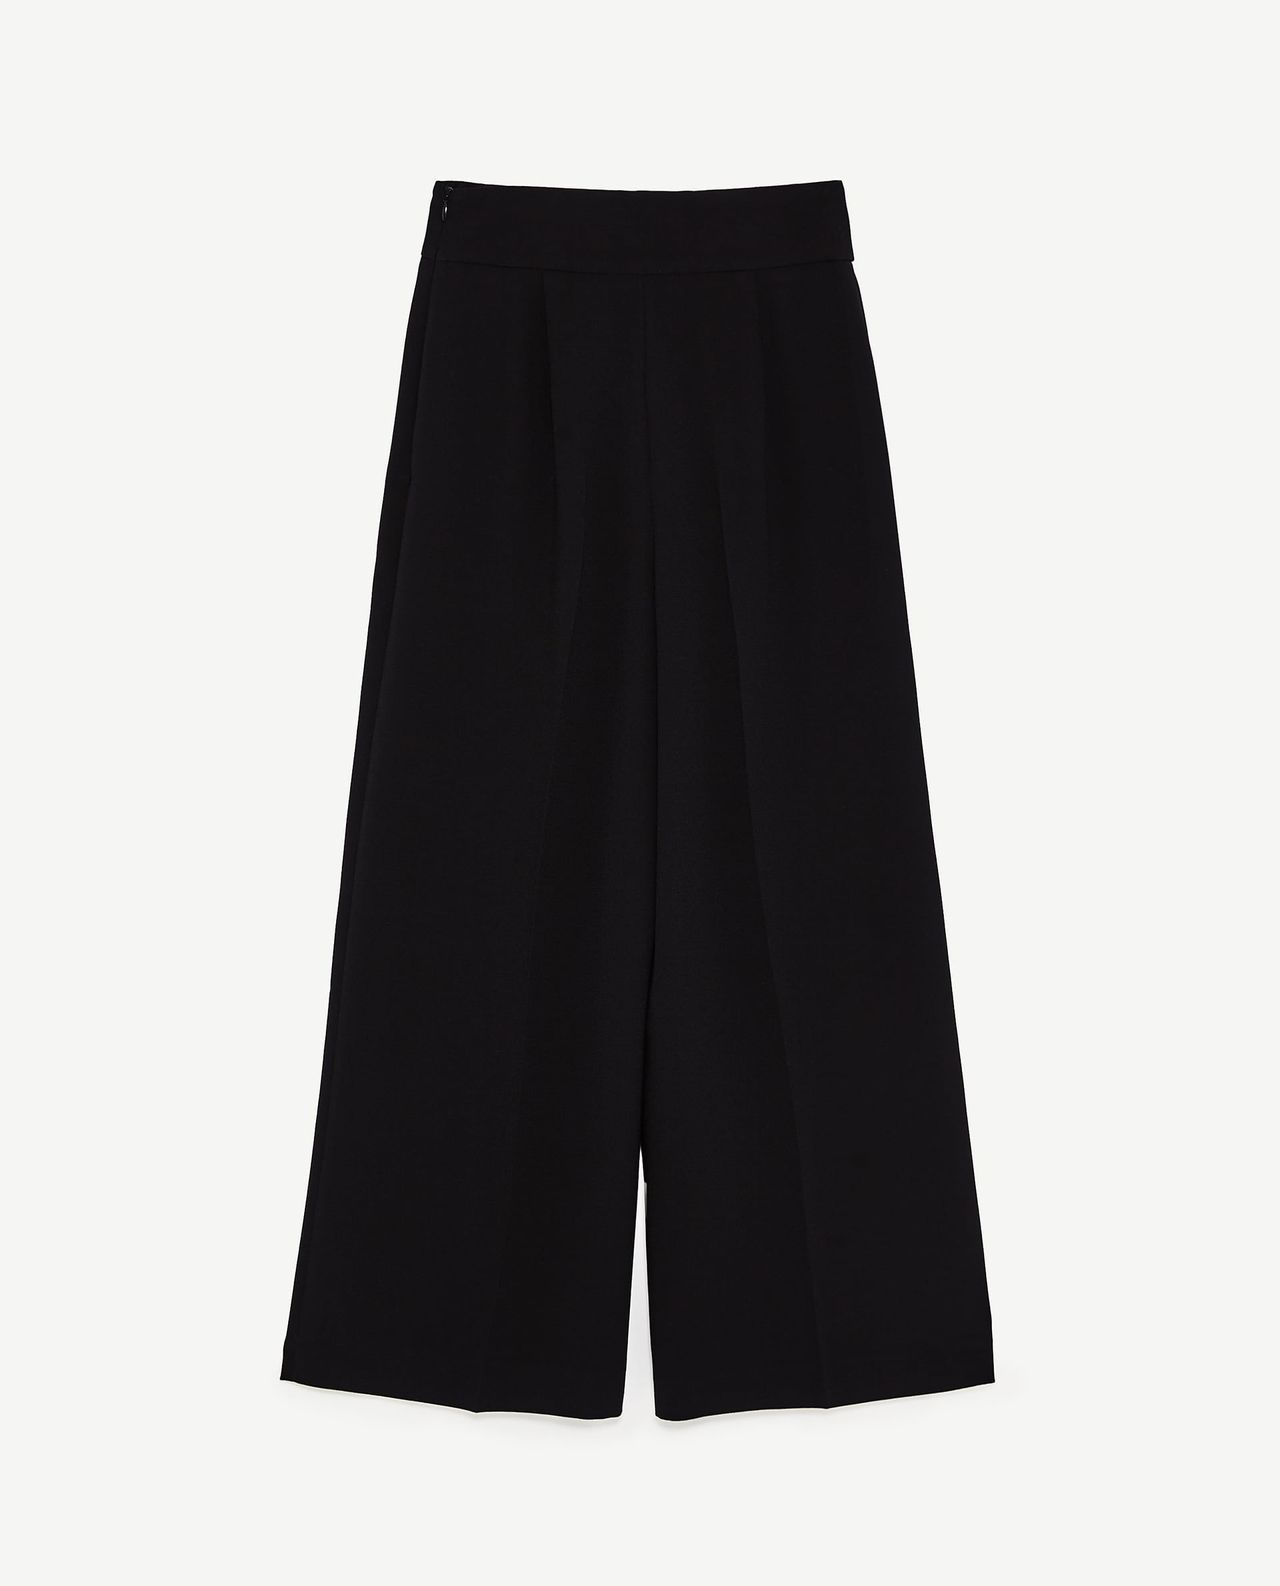 Kate Middleton Wore a $50 Pair of Black Zara Work Pants | Marie Claire